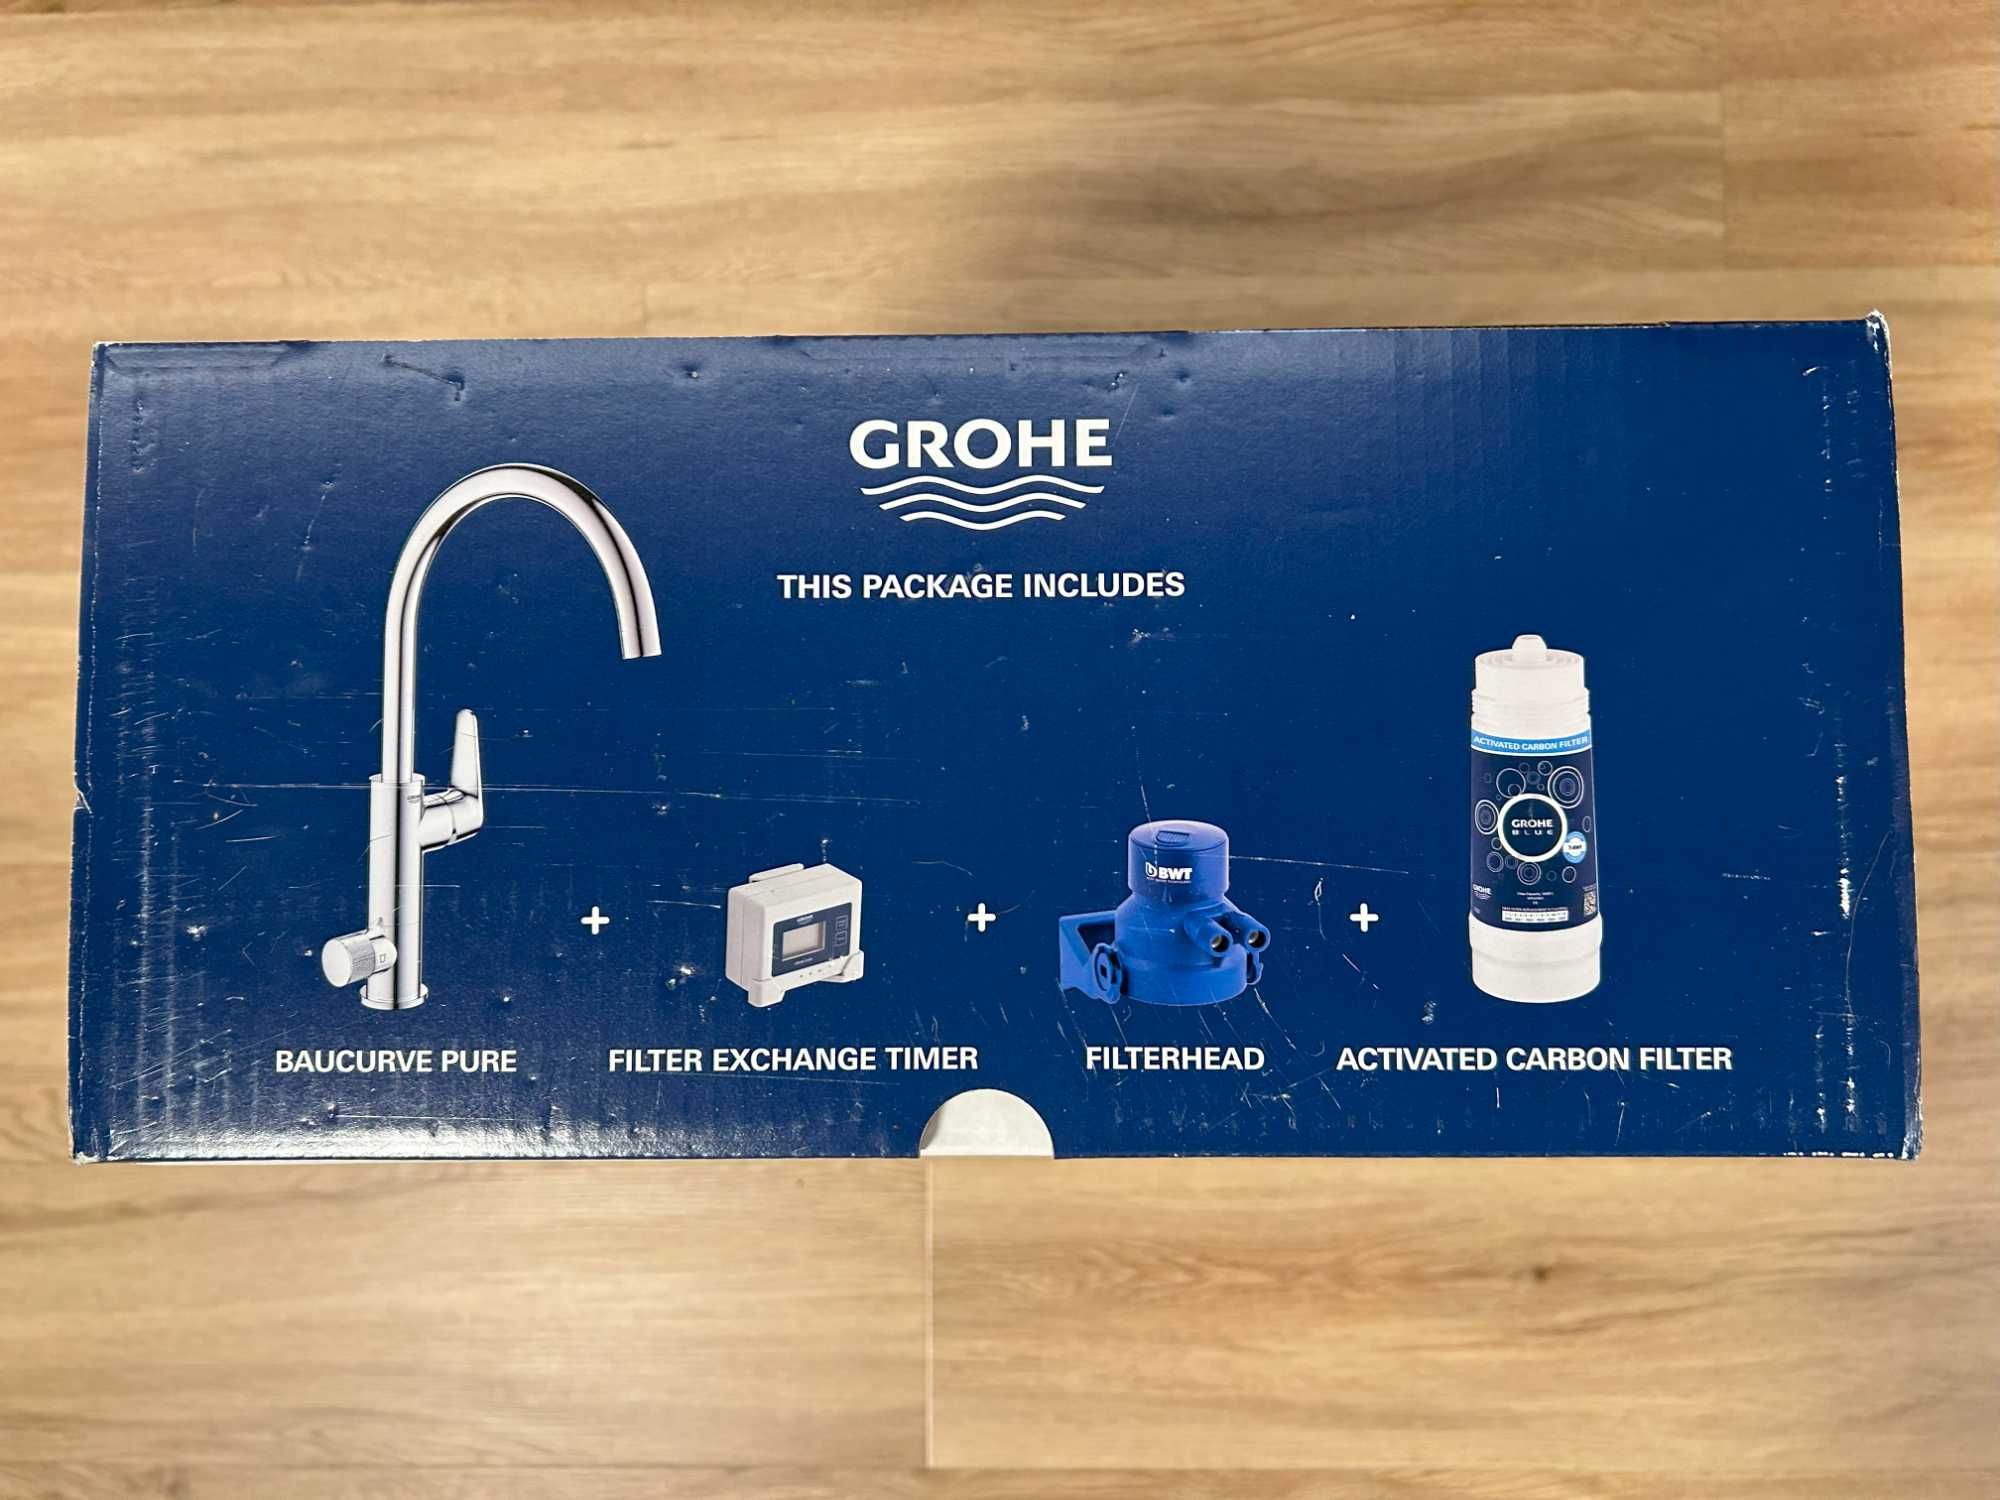 Grohe Blue Pure Baucurve all-in-one pack